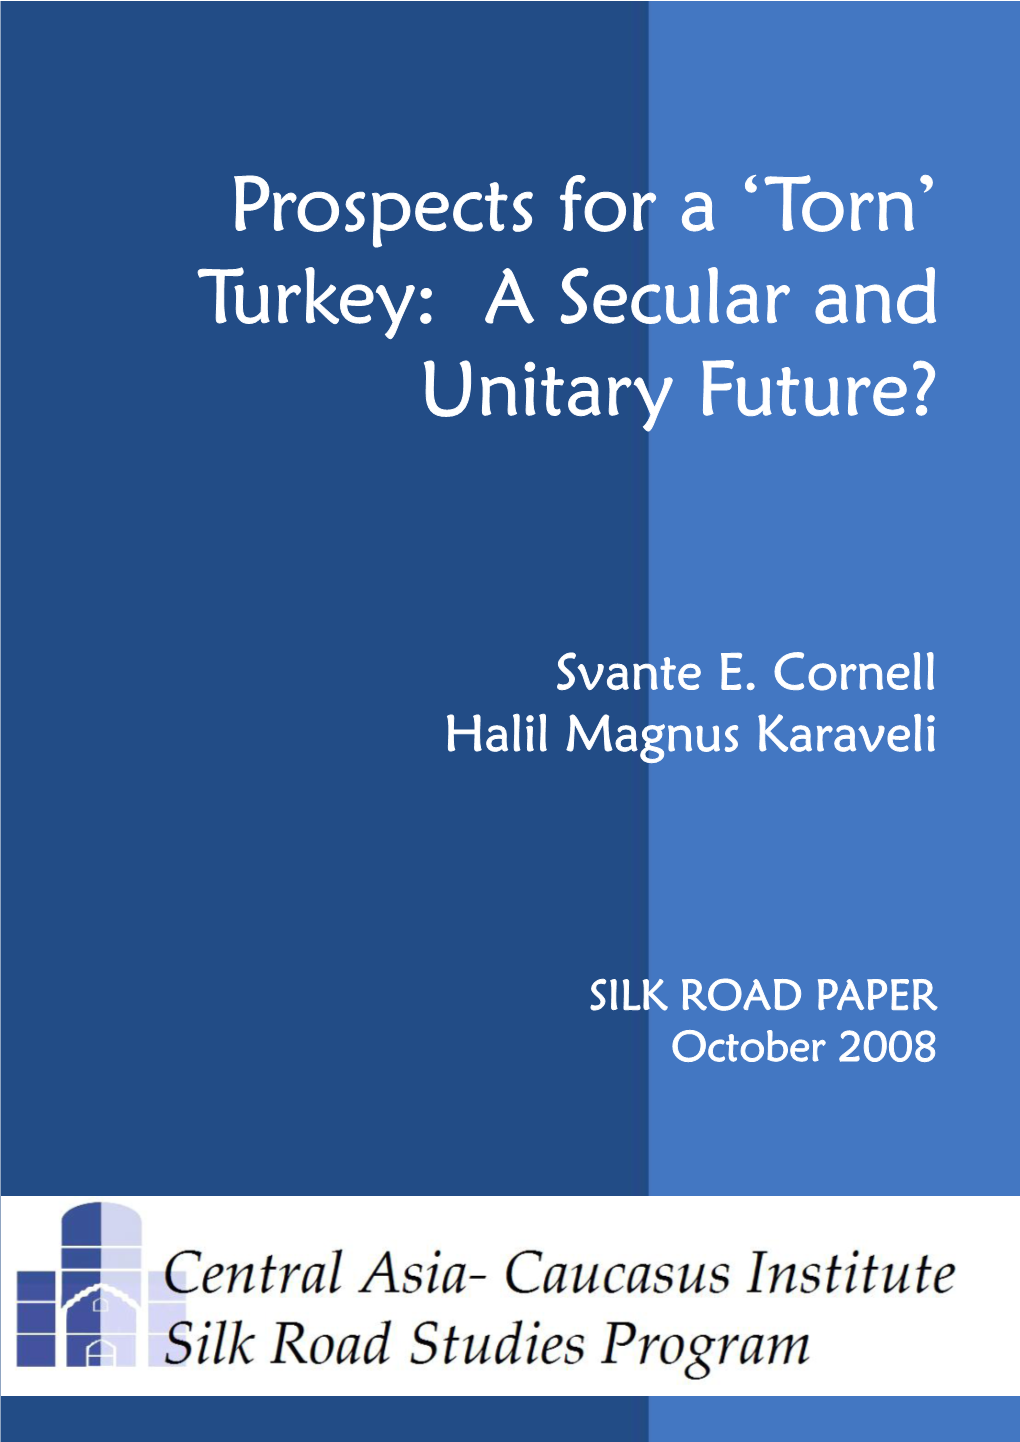 Prospects for a 'Torn' Turkey: a Secular and Unitary Future?